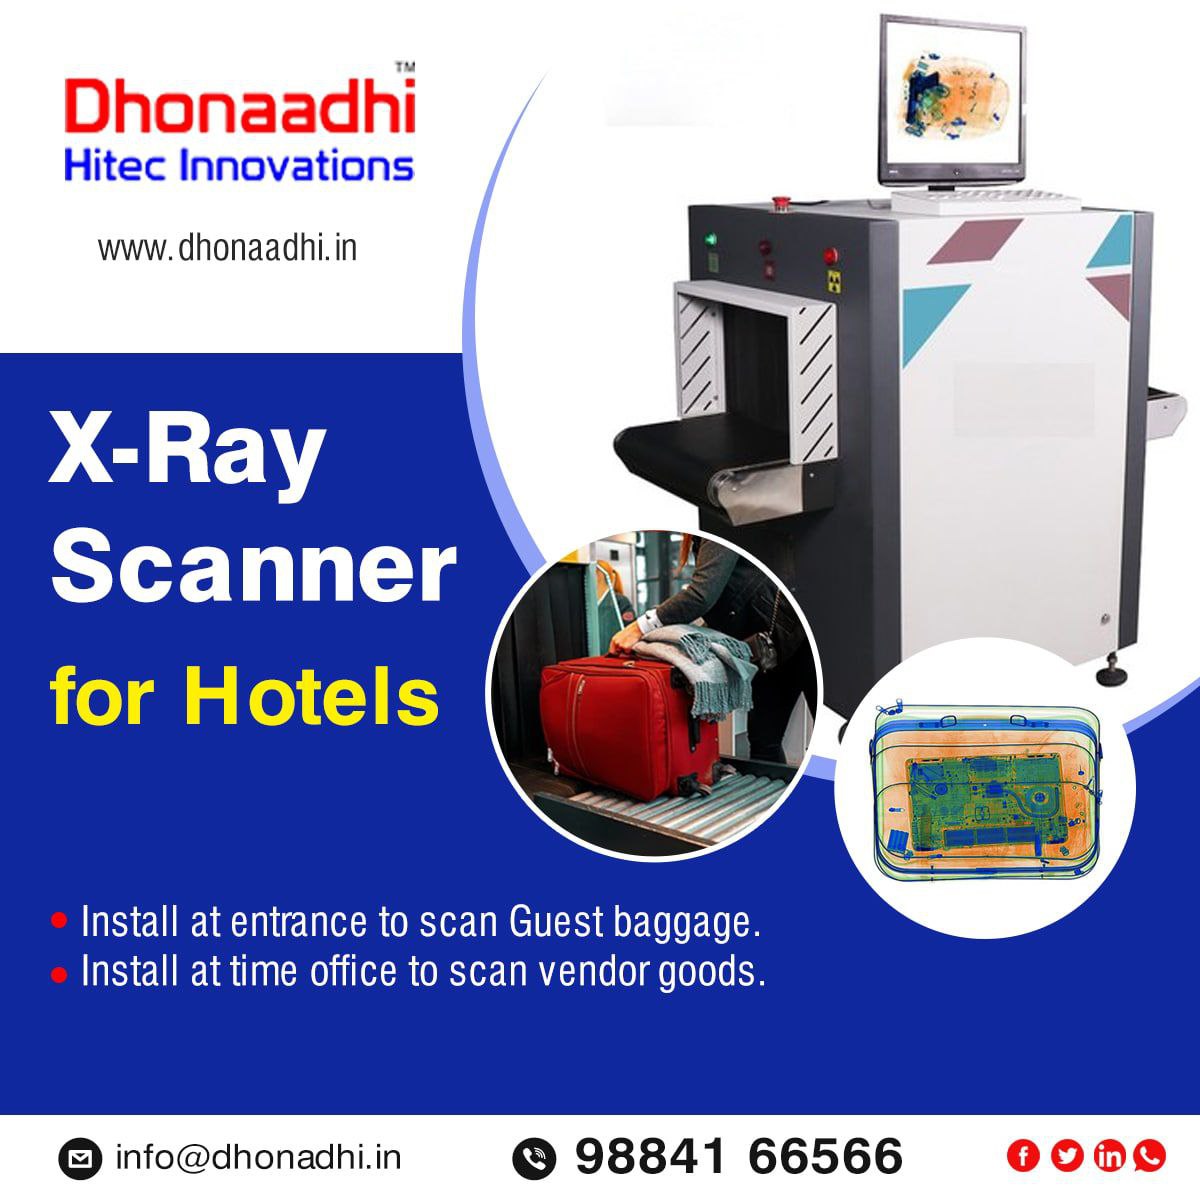 #Dhonaadhi #scanner #security #safety 
 #police #politicalevents #metrorail #airport #hotels #temples #makeinindia #manufacturingindustry #supplier #technology  #salesandmarketing   #smartindia #mallshopping #hotelssandresorts #airportsecurity